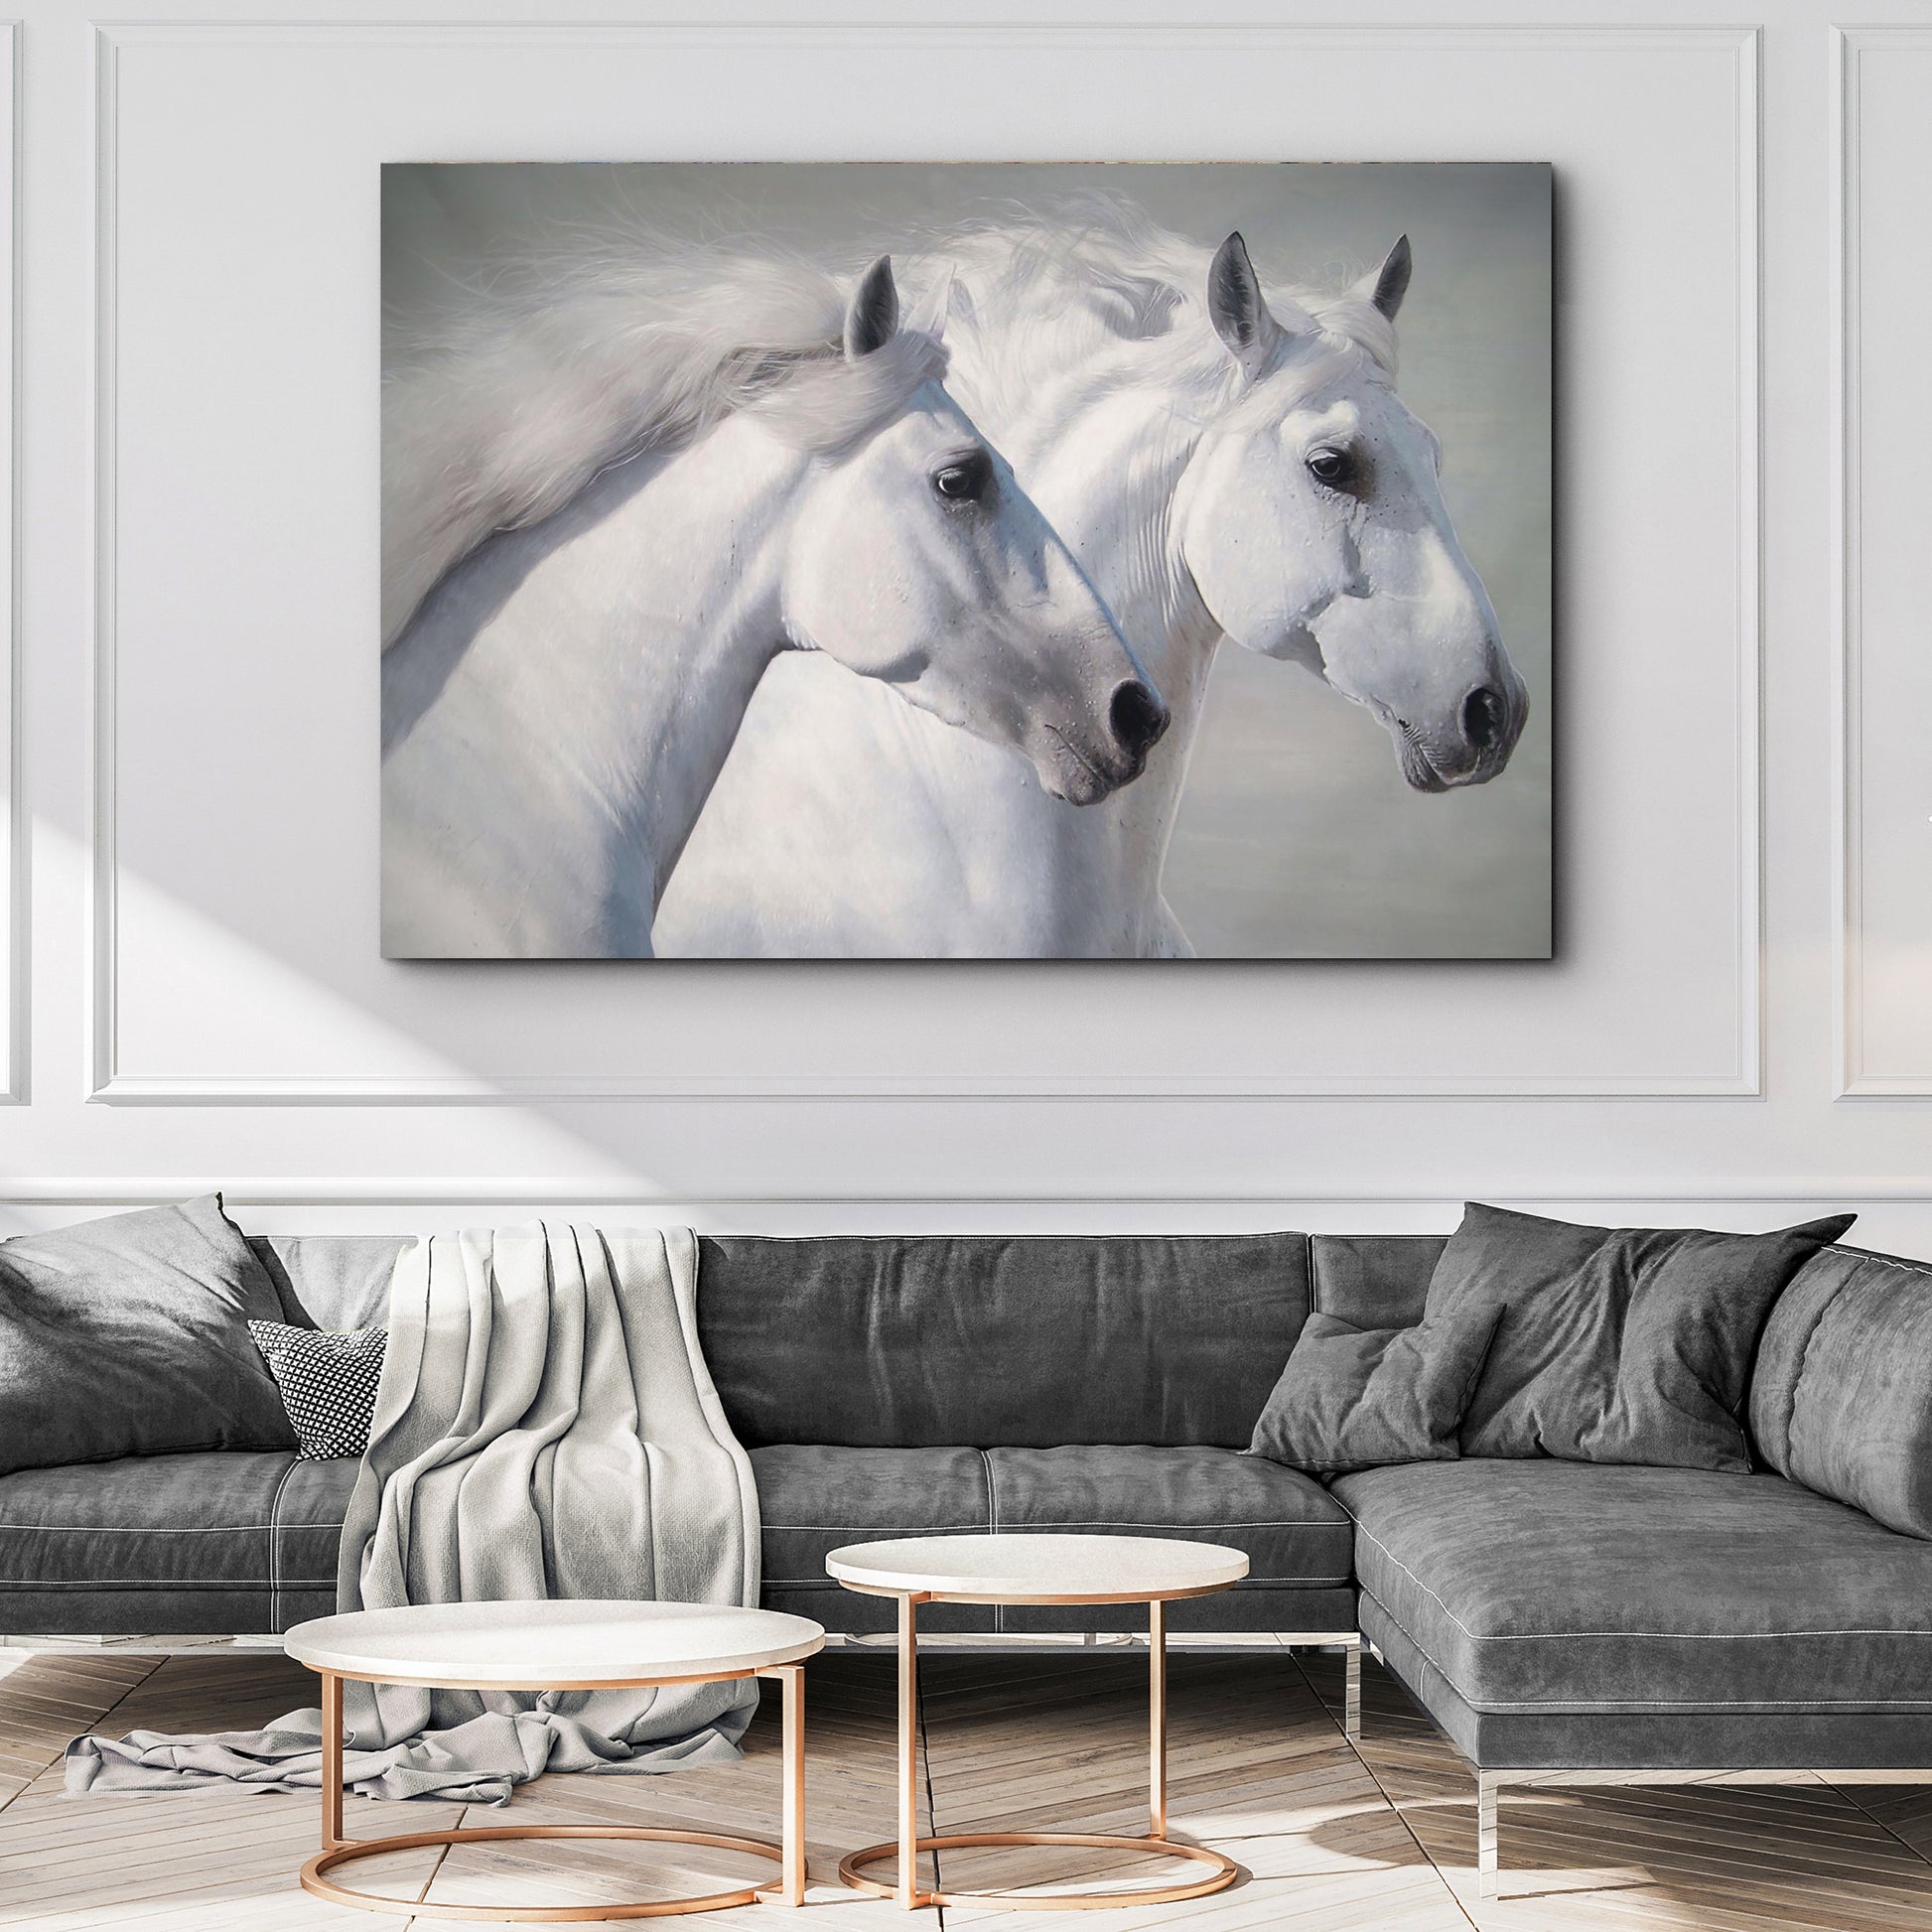 Galloping White Horses Canvas Wall Art Style 2 - Image by Tailored Canvases